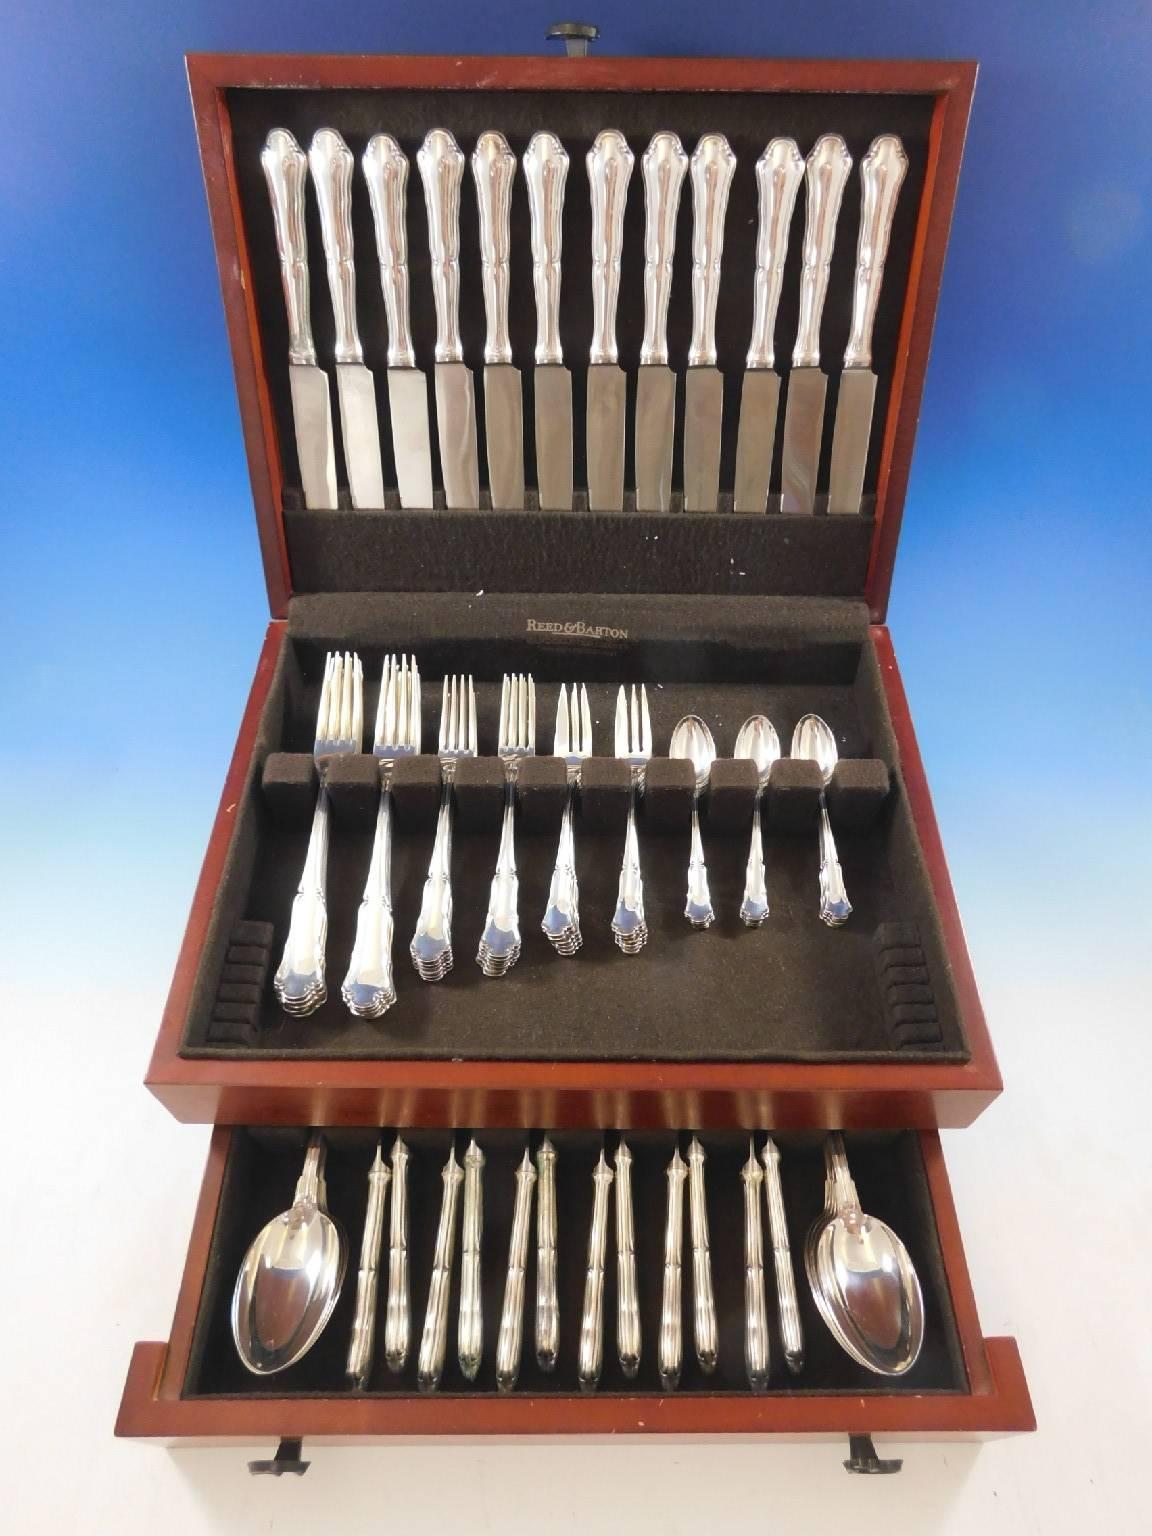 Outstanding dinner size Savoy by Buccellati Clemanti Italy 800 silver flatware set, 84 pieces. This set includes:

 12 dinner size knives, 9 5/8